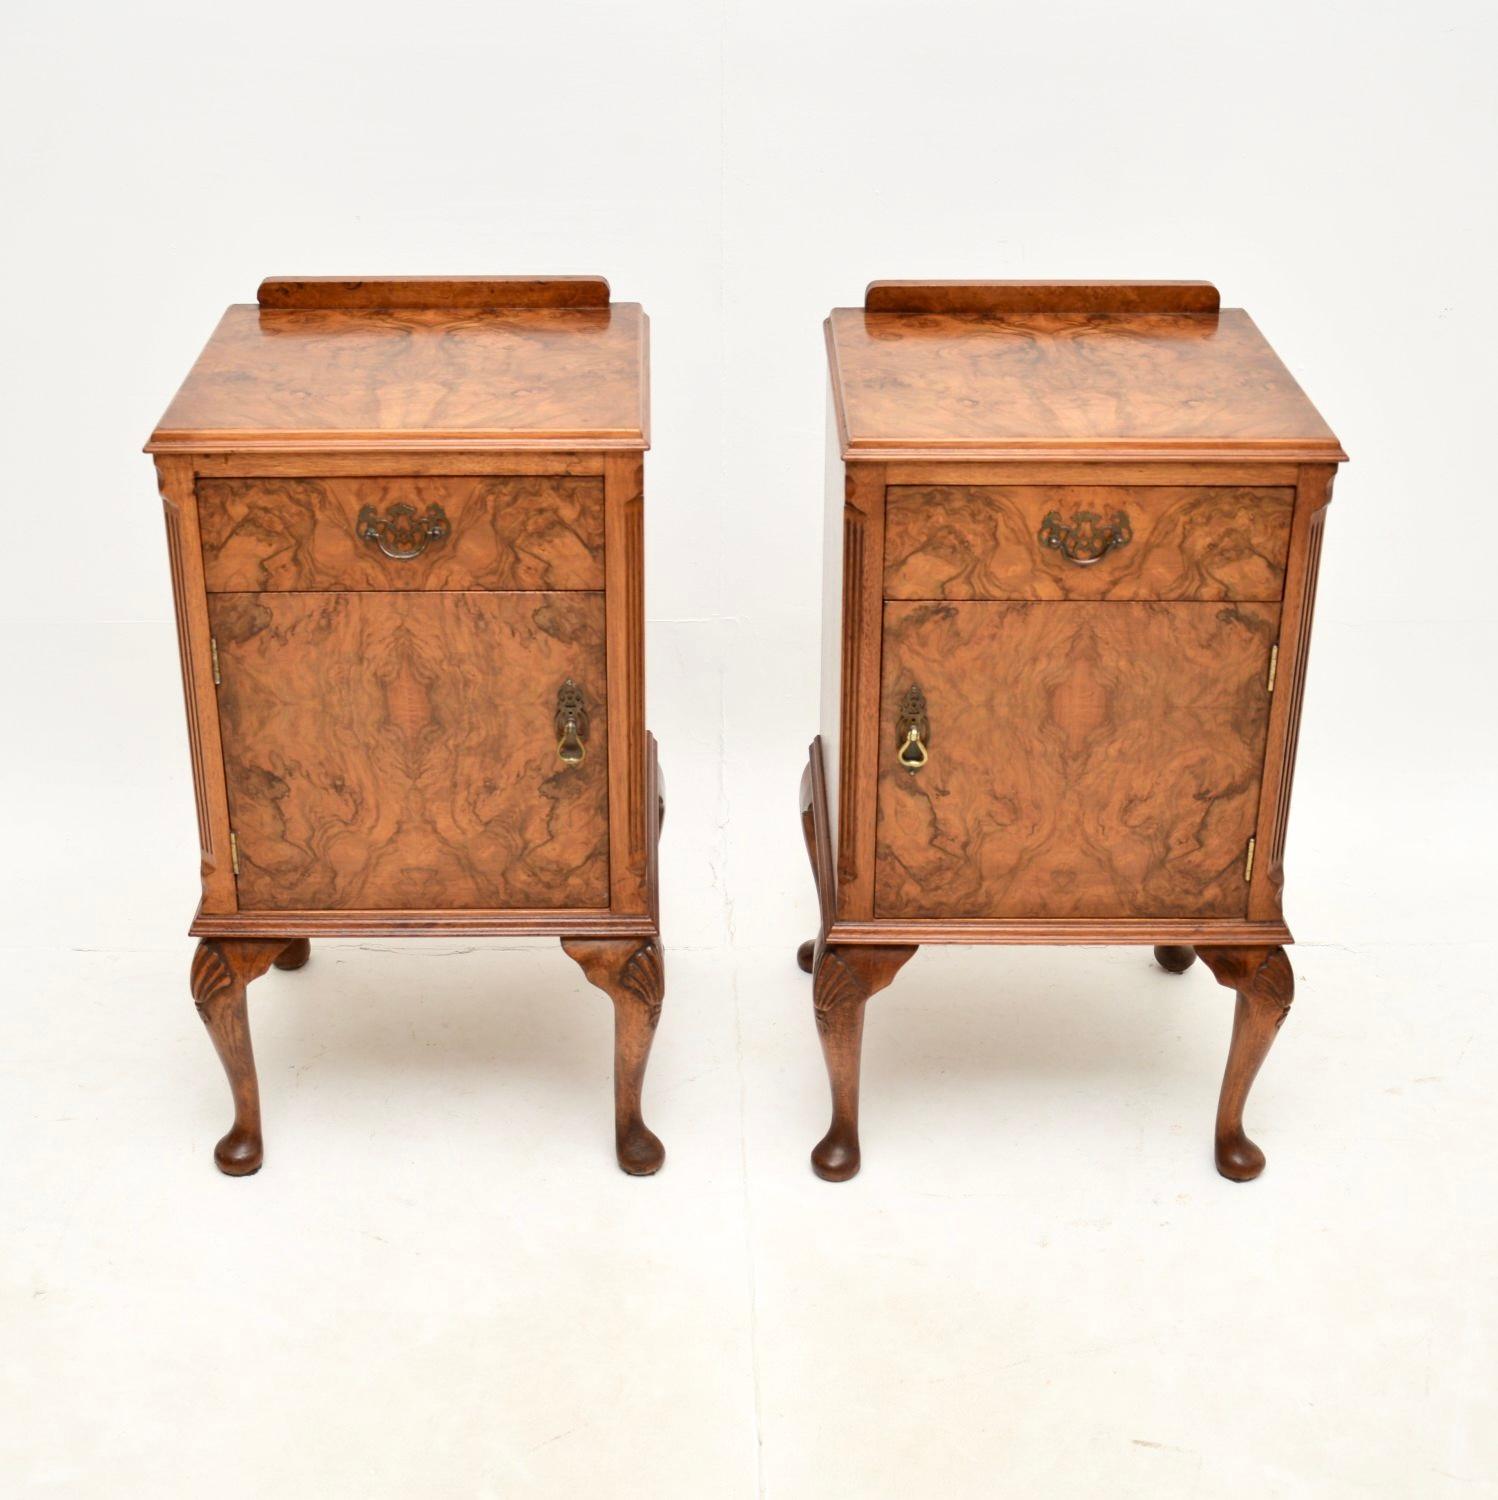 A superb pair of antique figured walnut bedside cabinets. They were made in England, and they date from around the 1920’s.

They are of fine quality and are a very useful size. The walnut is beautifully figured with stunning grain patterns and a